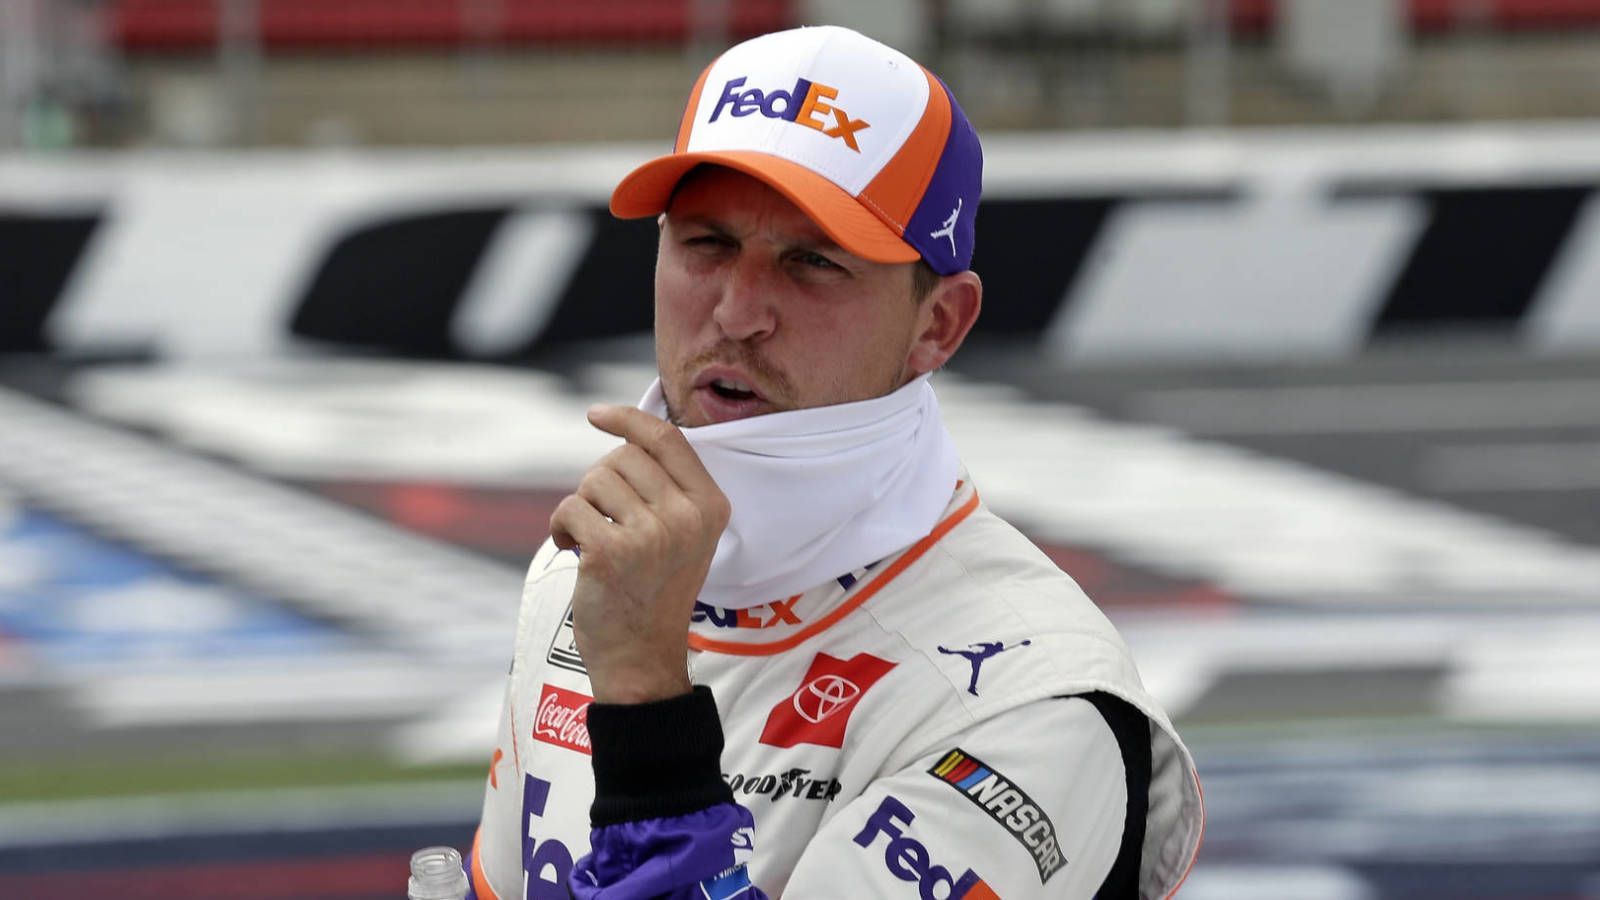 Three Denny Hamlin team members suspended after rules violation at